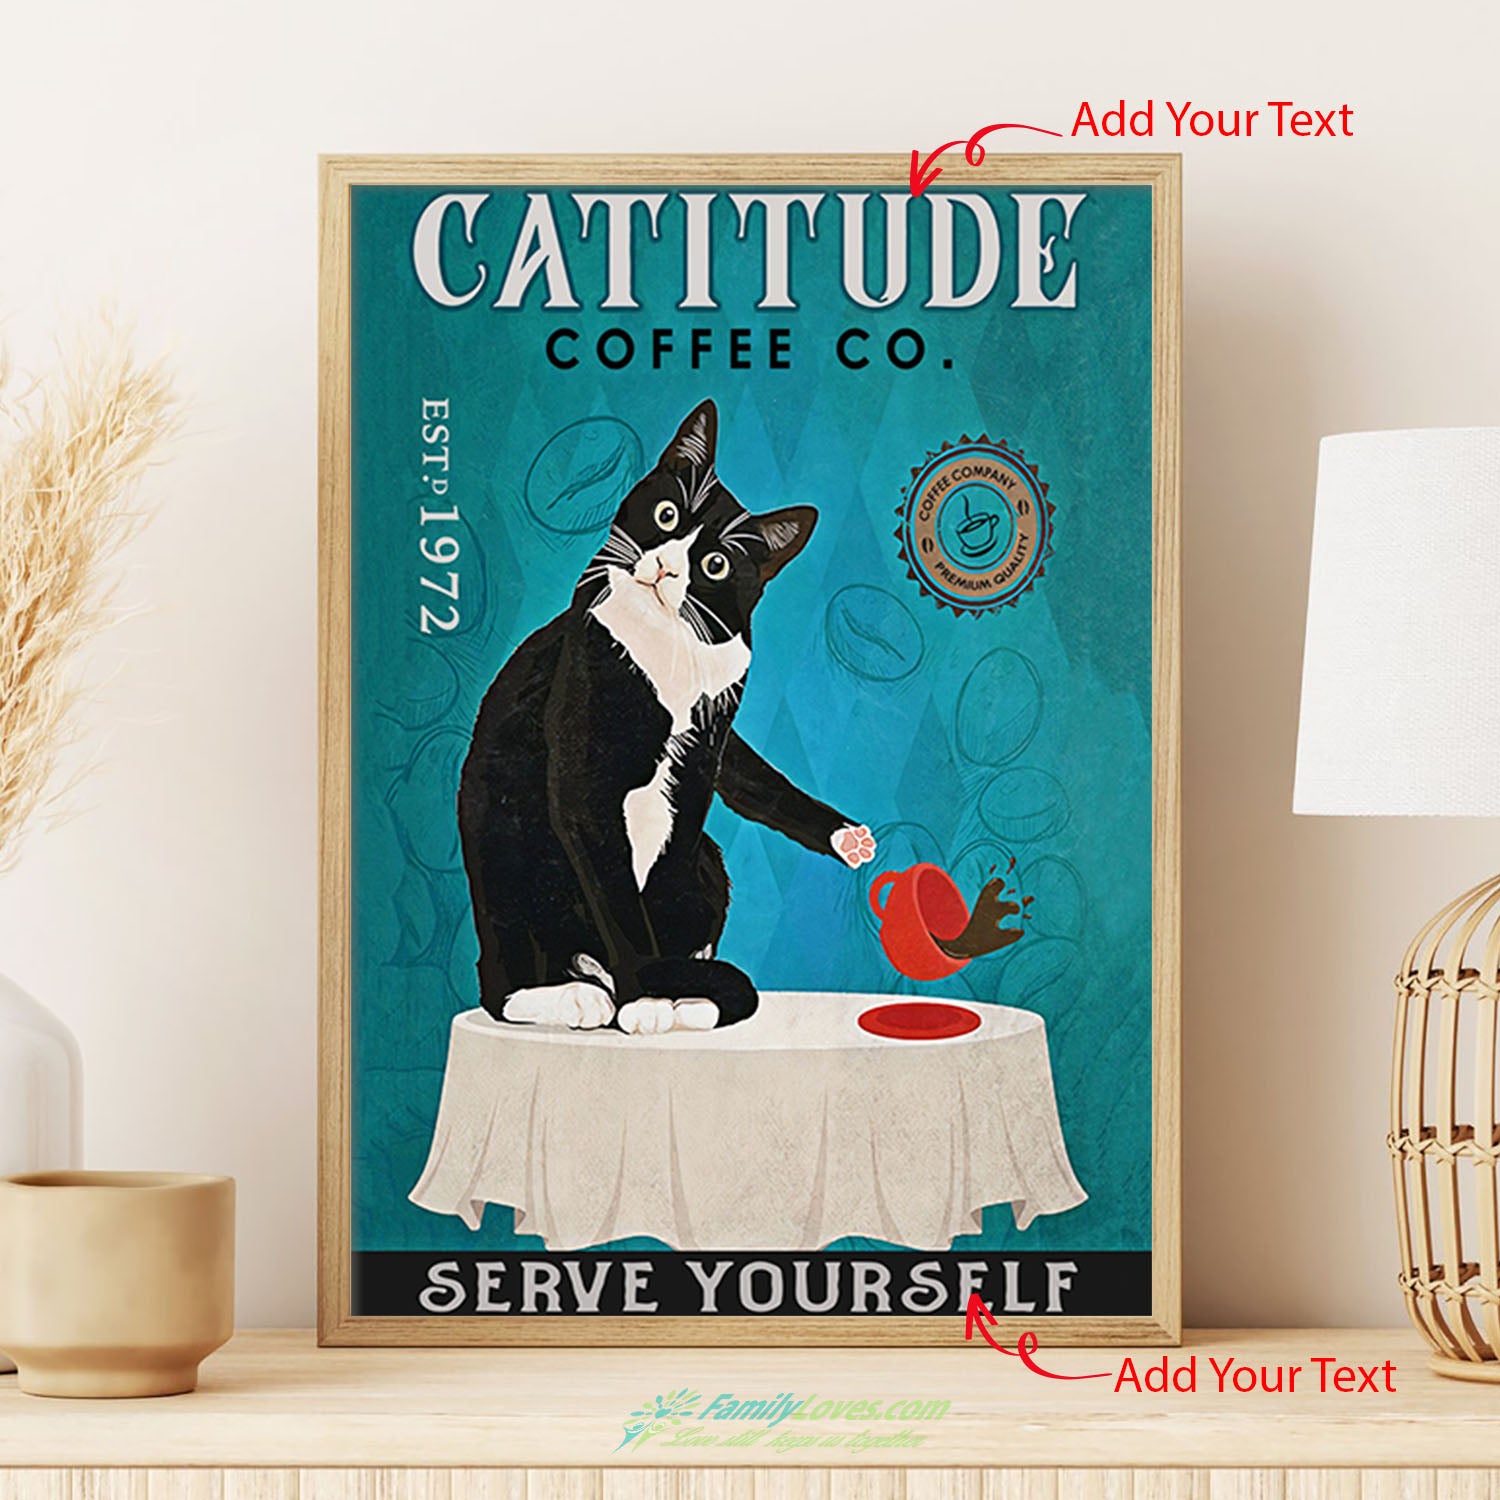 Cattitude Coffee Co Serve Yourself Canvas Painting Poster 18X24 All Size 1